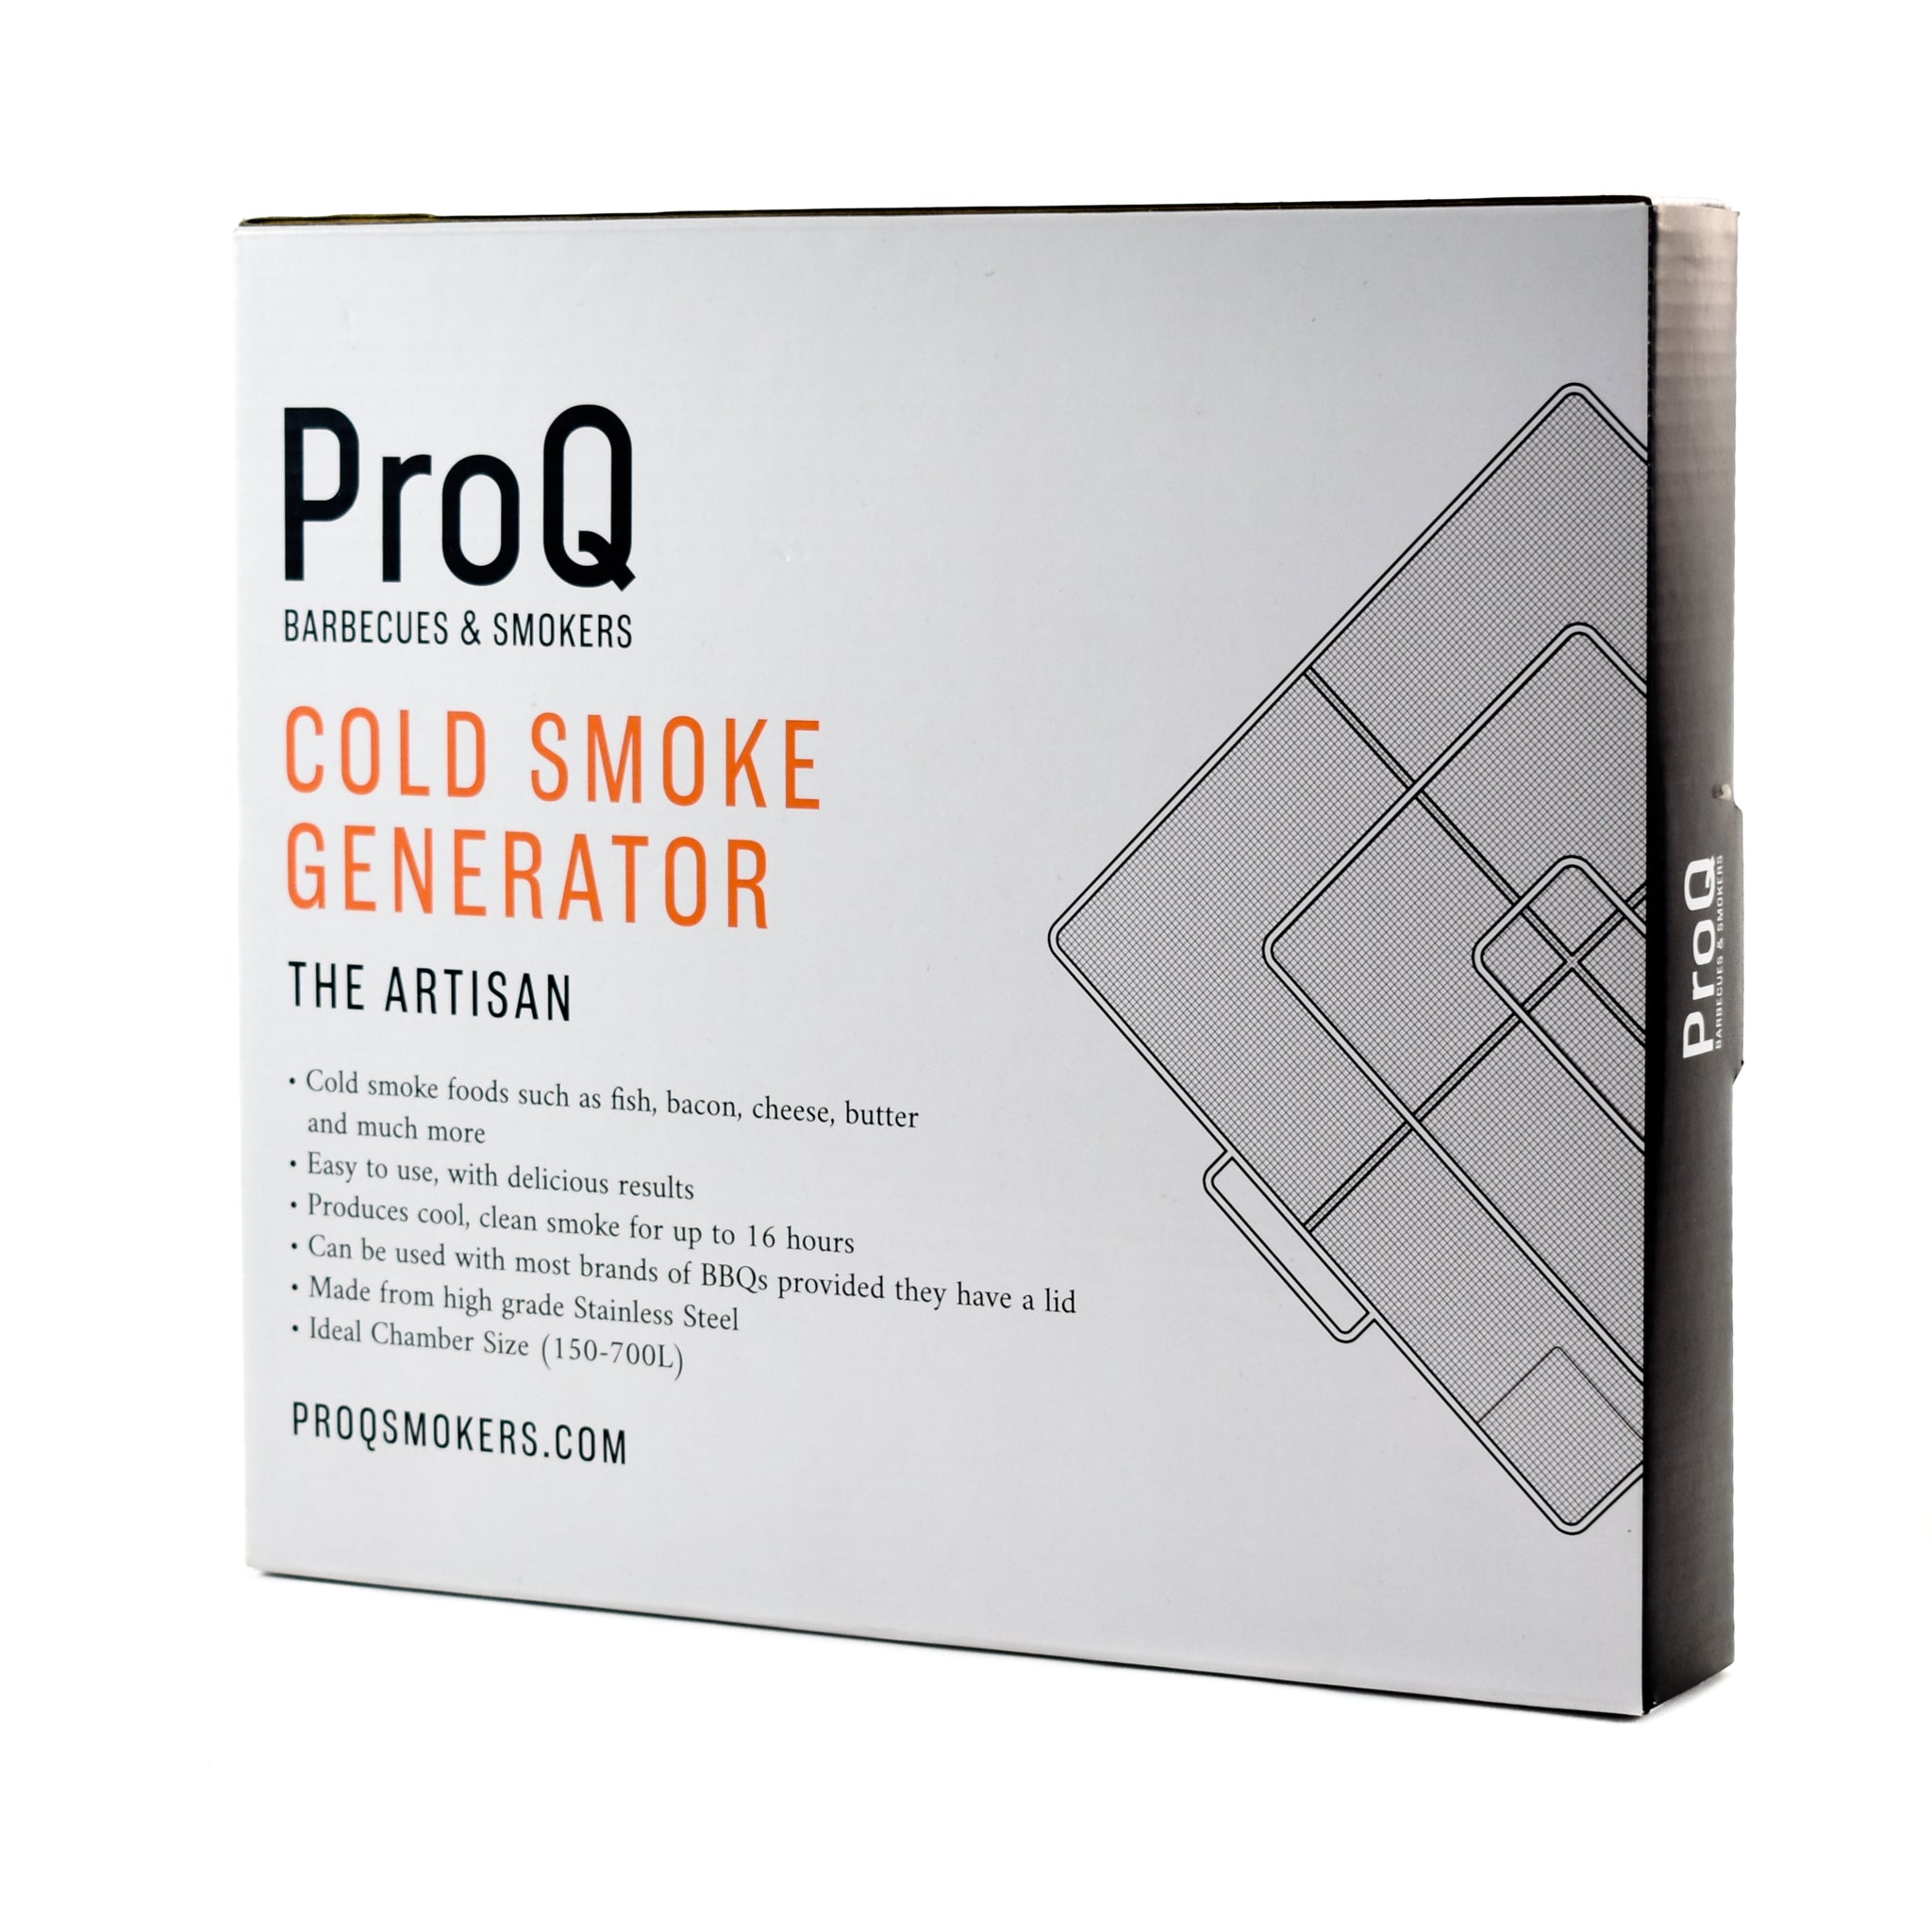 ProQ Cold Smoke Generator Buy Online | Sous Chef